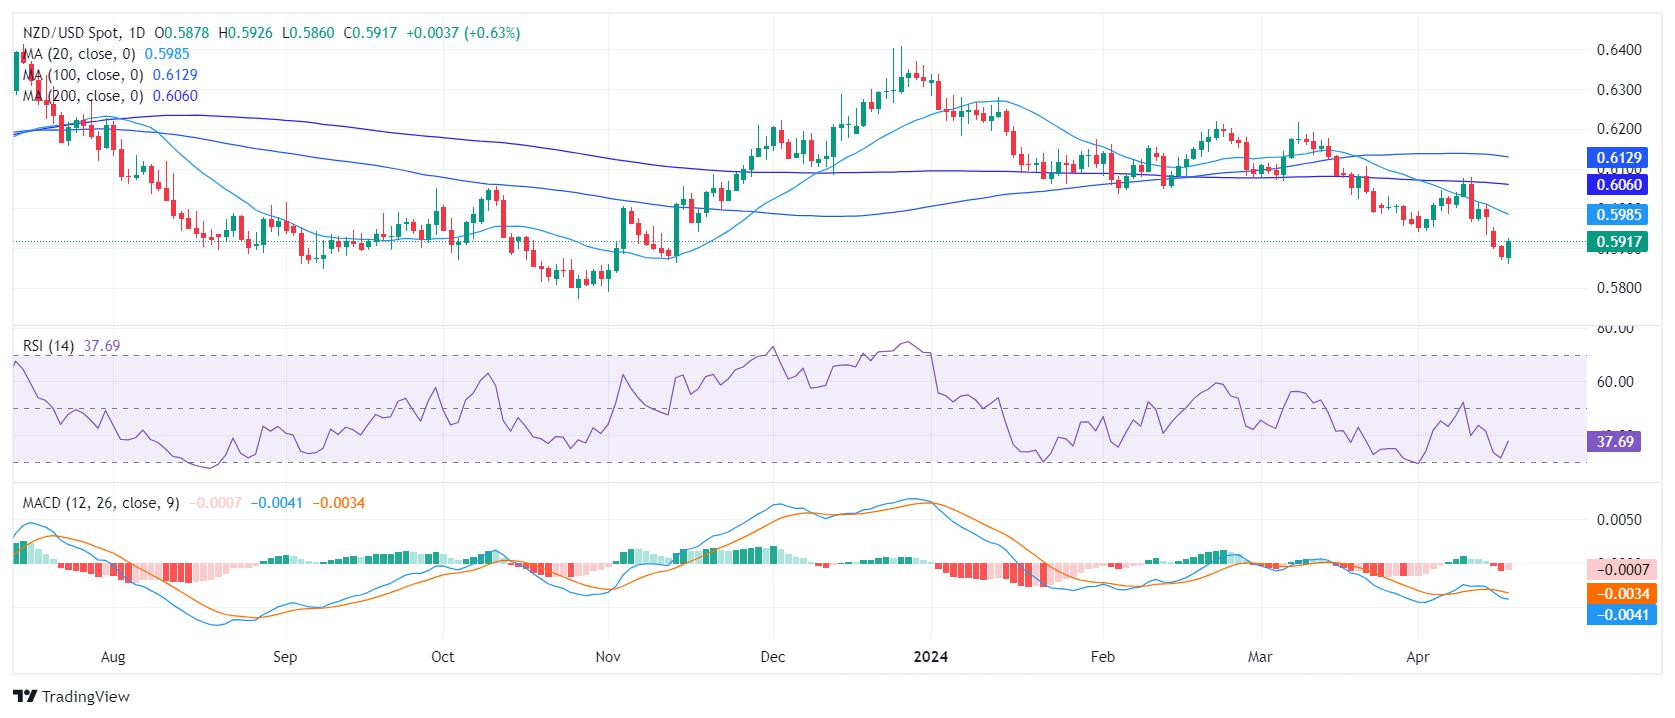 NZD/USD Price Analysis: Downward trend likely to continue despite indicators recovering